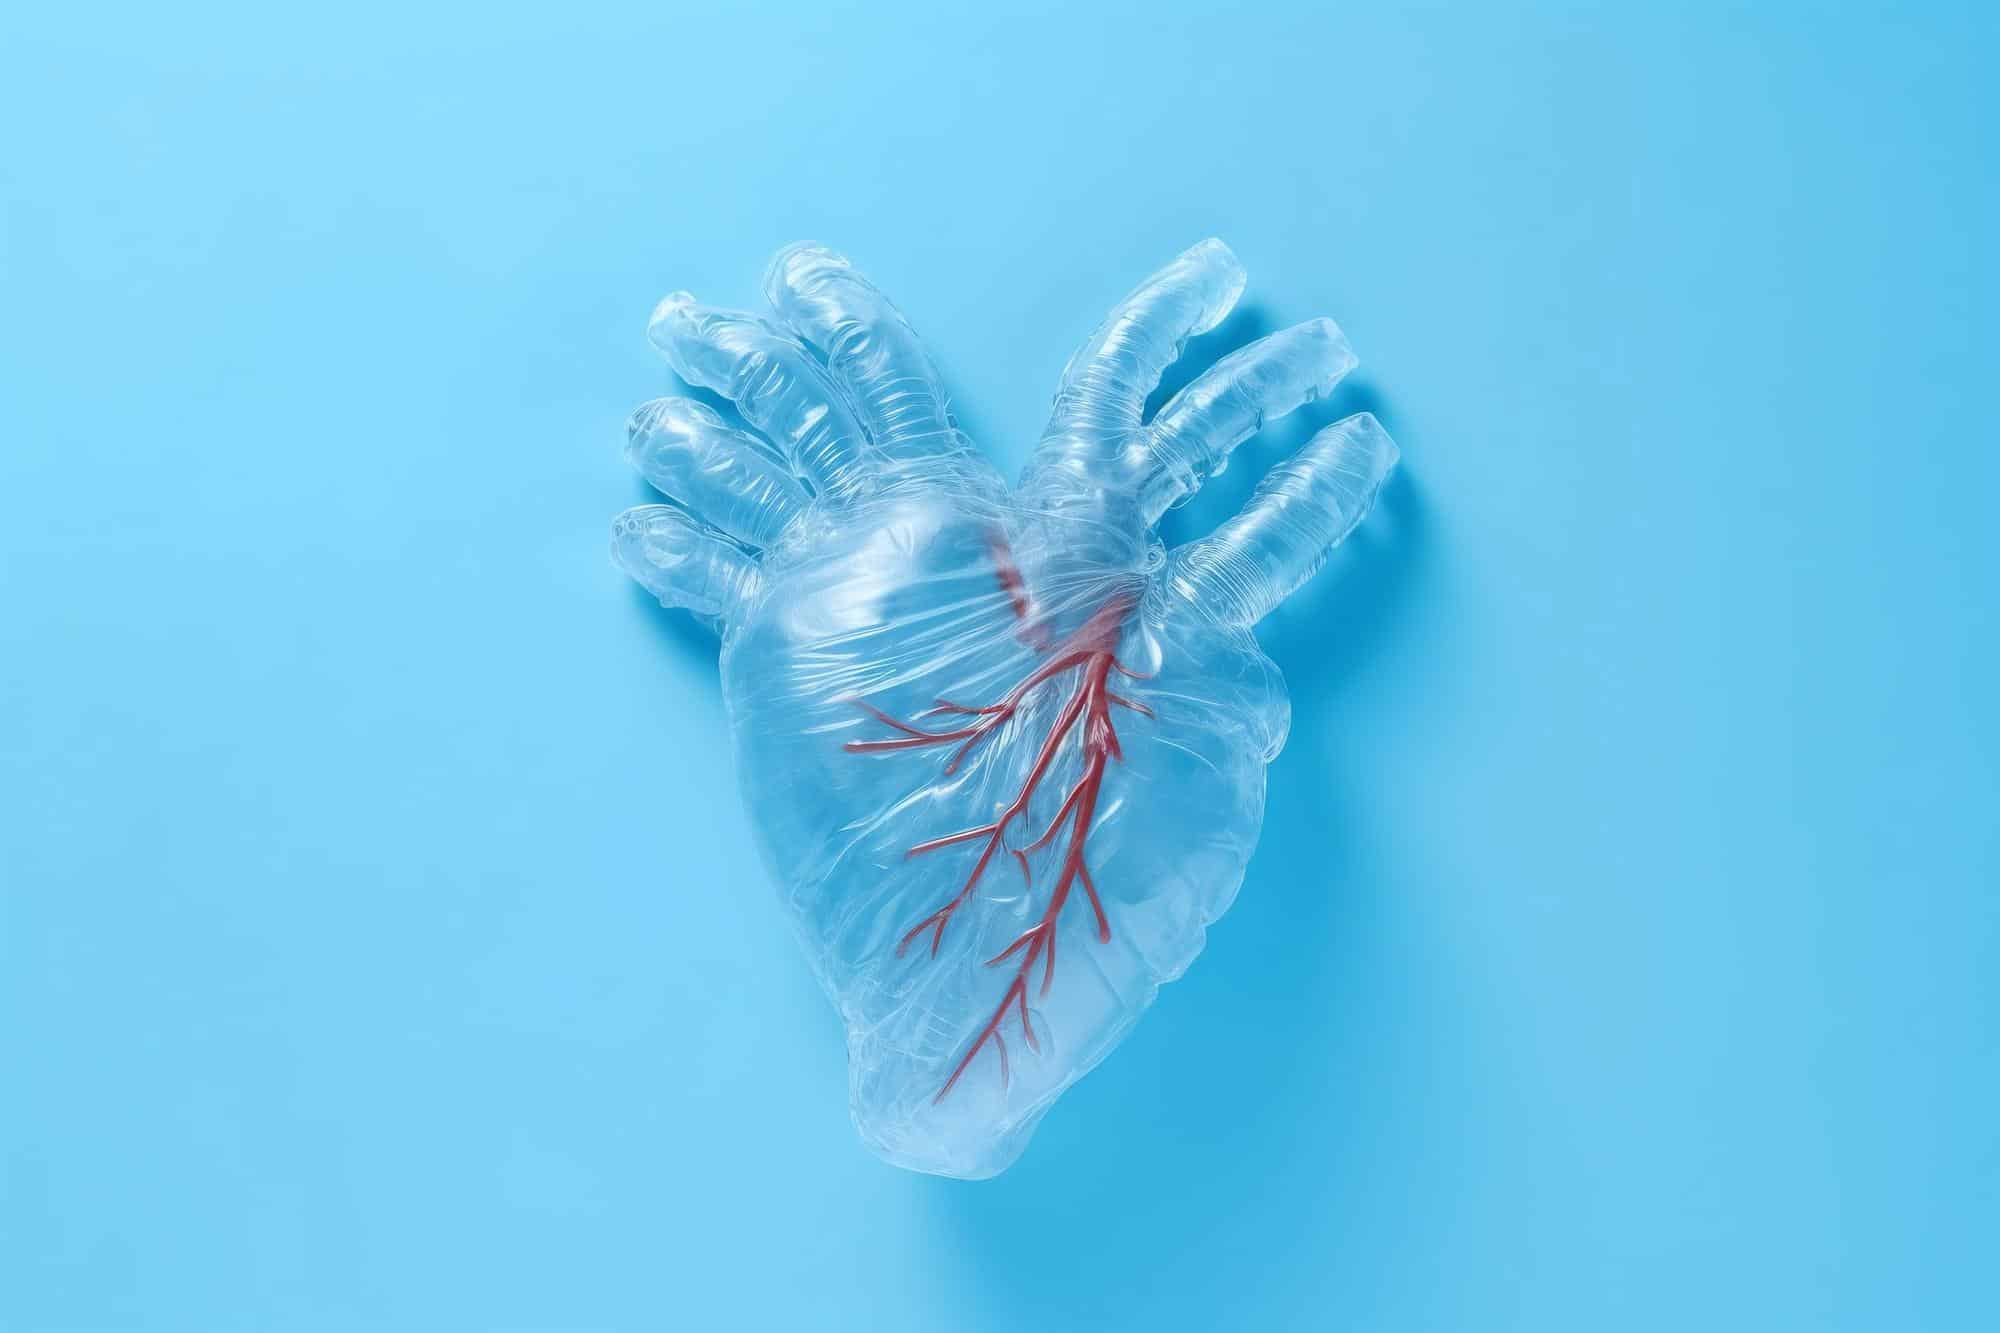 Researchers Found Microplastics In Many Heart Tissues